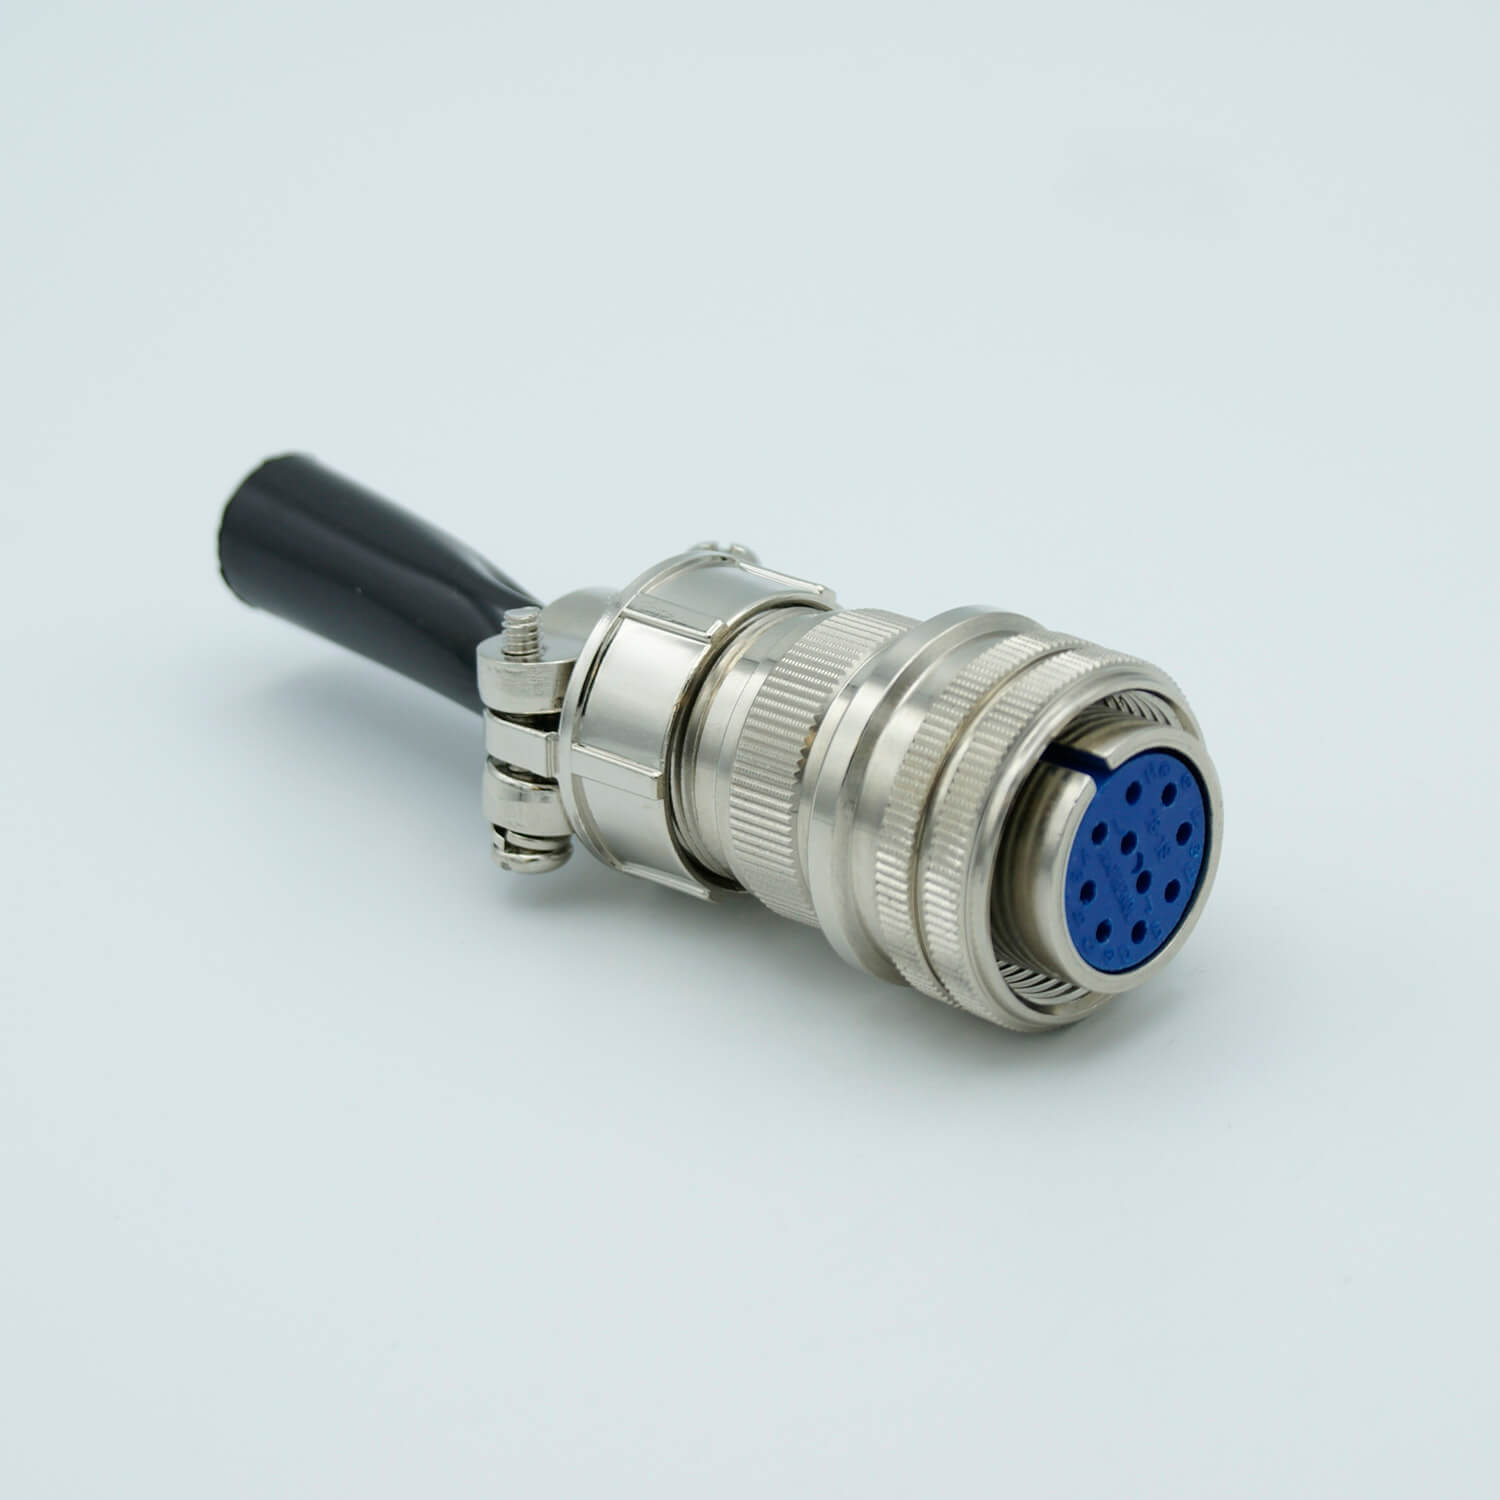 Ms Series Air Side Connector 10 Pins 700 Volts 10 Amps Per Pin Accepts 0 056 Or 0 062 Dia